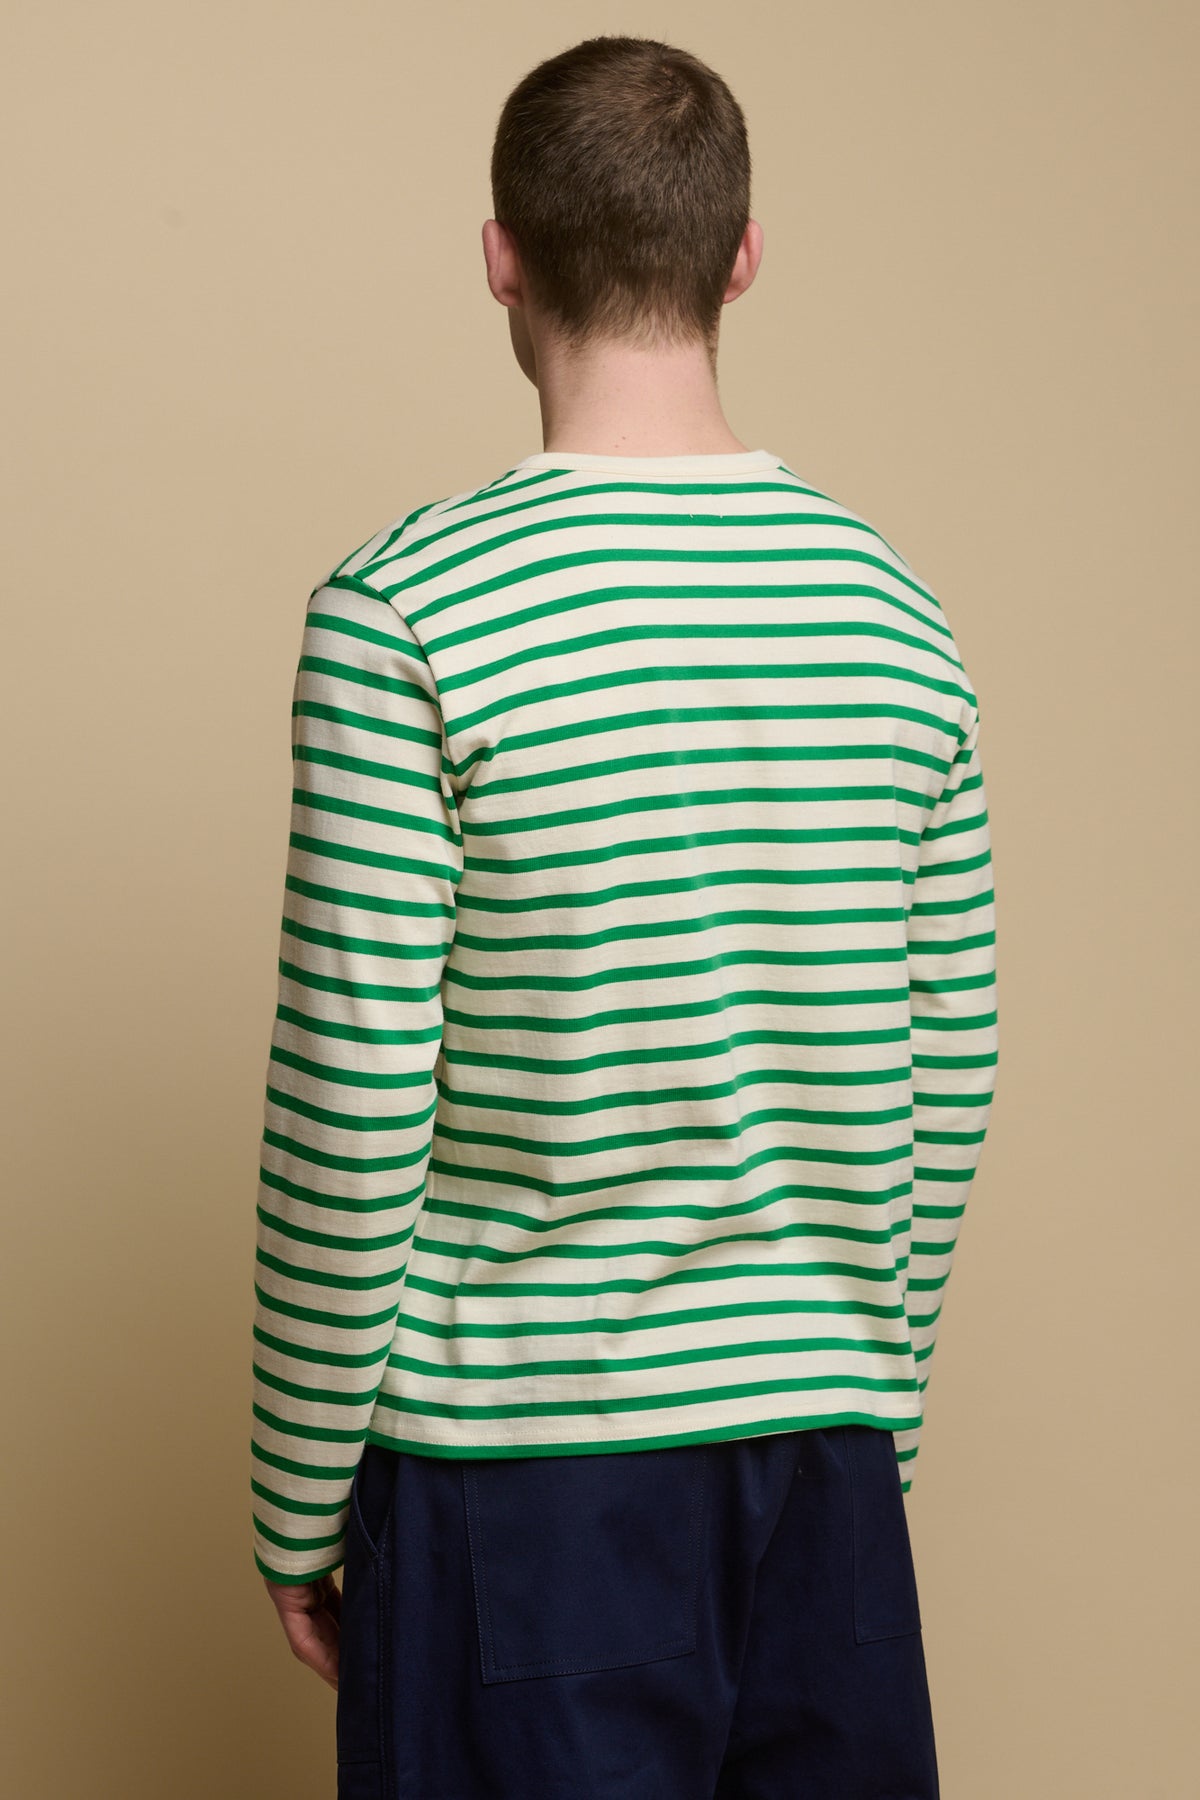 
            Thigh up image of the back of brunet male wearing Breton in ecru green